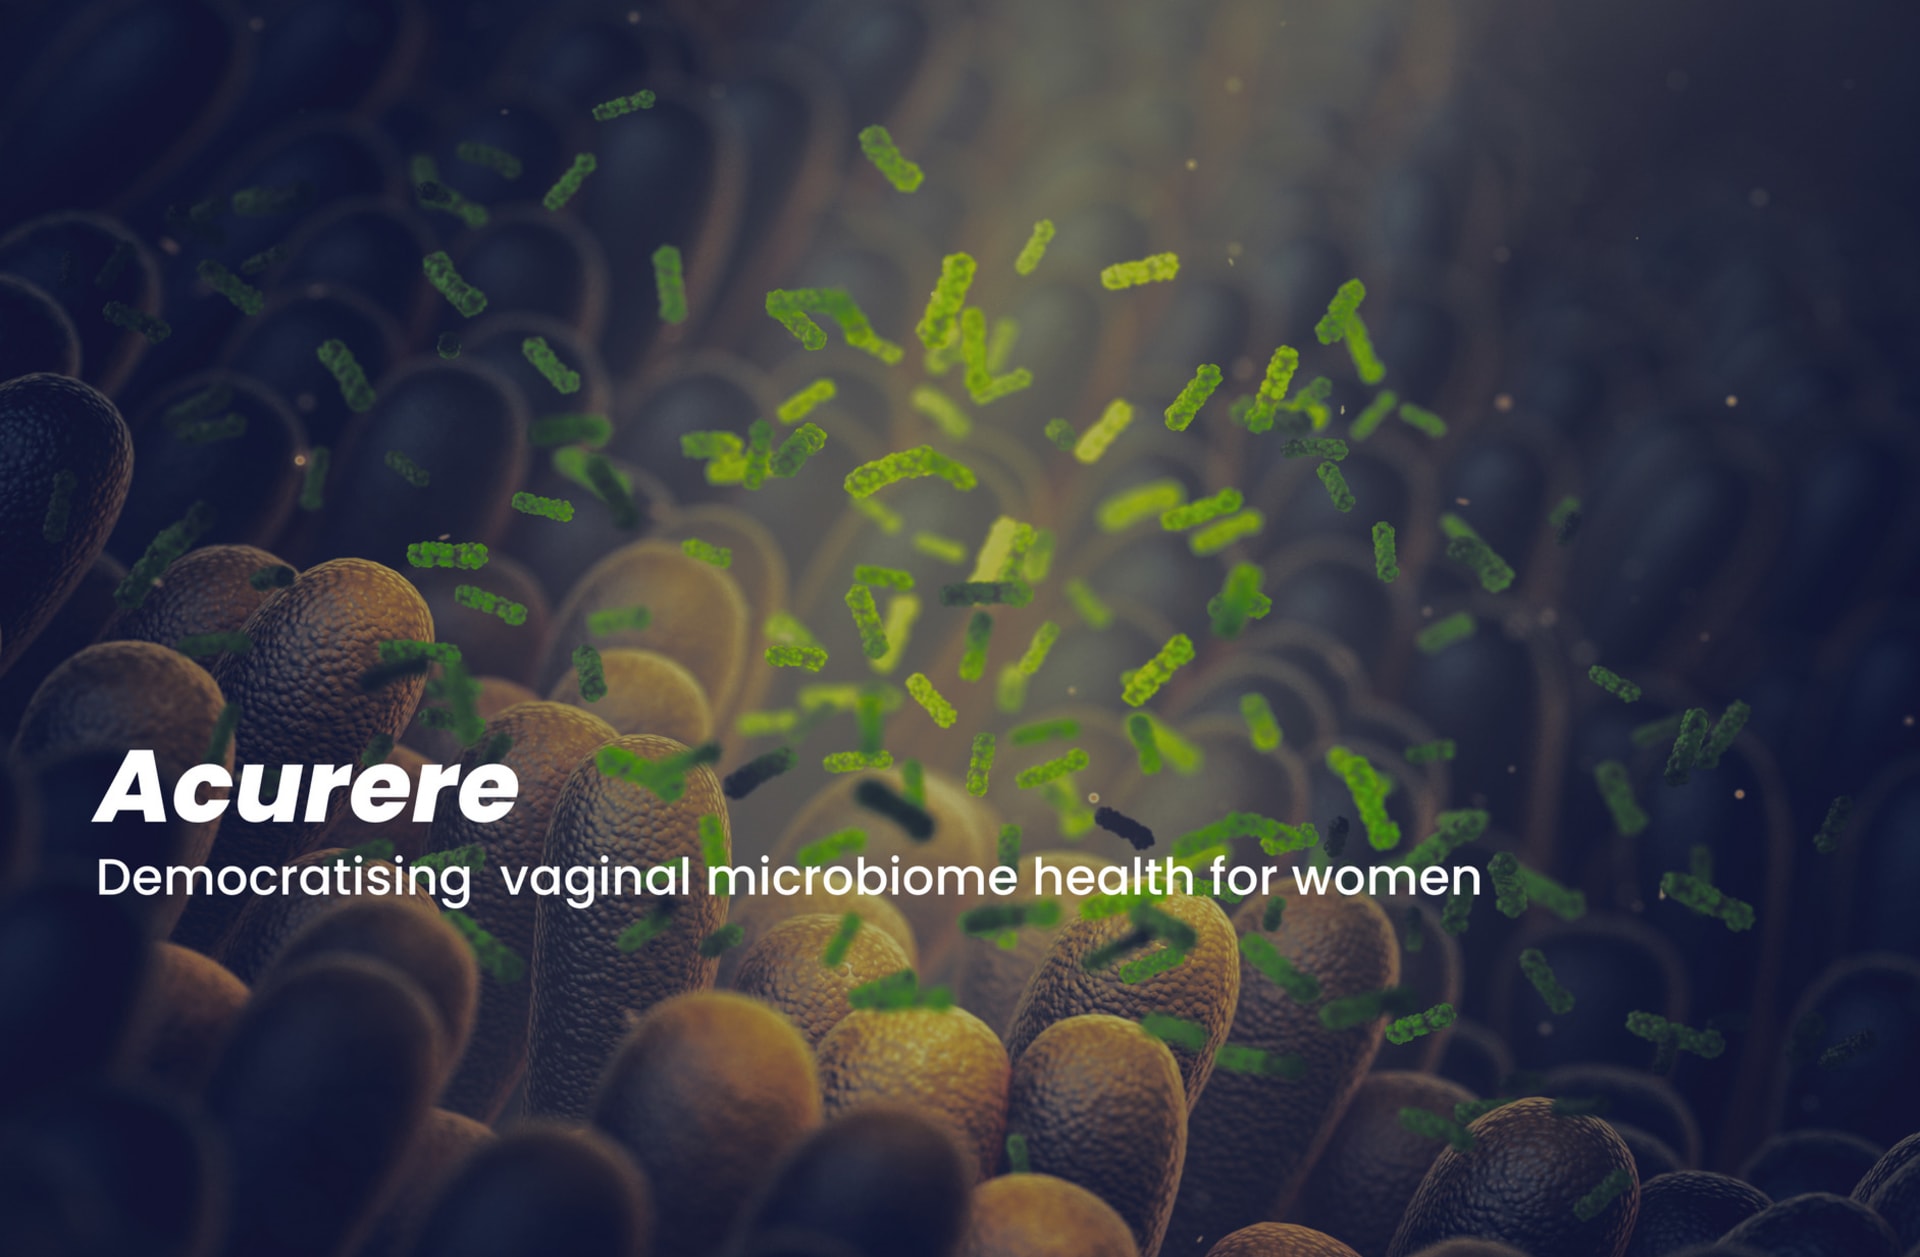 Poster image of microbiome, project name: Acurere, democratising vaginal microbiome health for women.